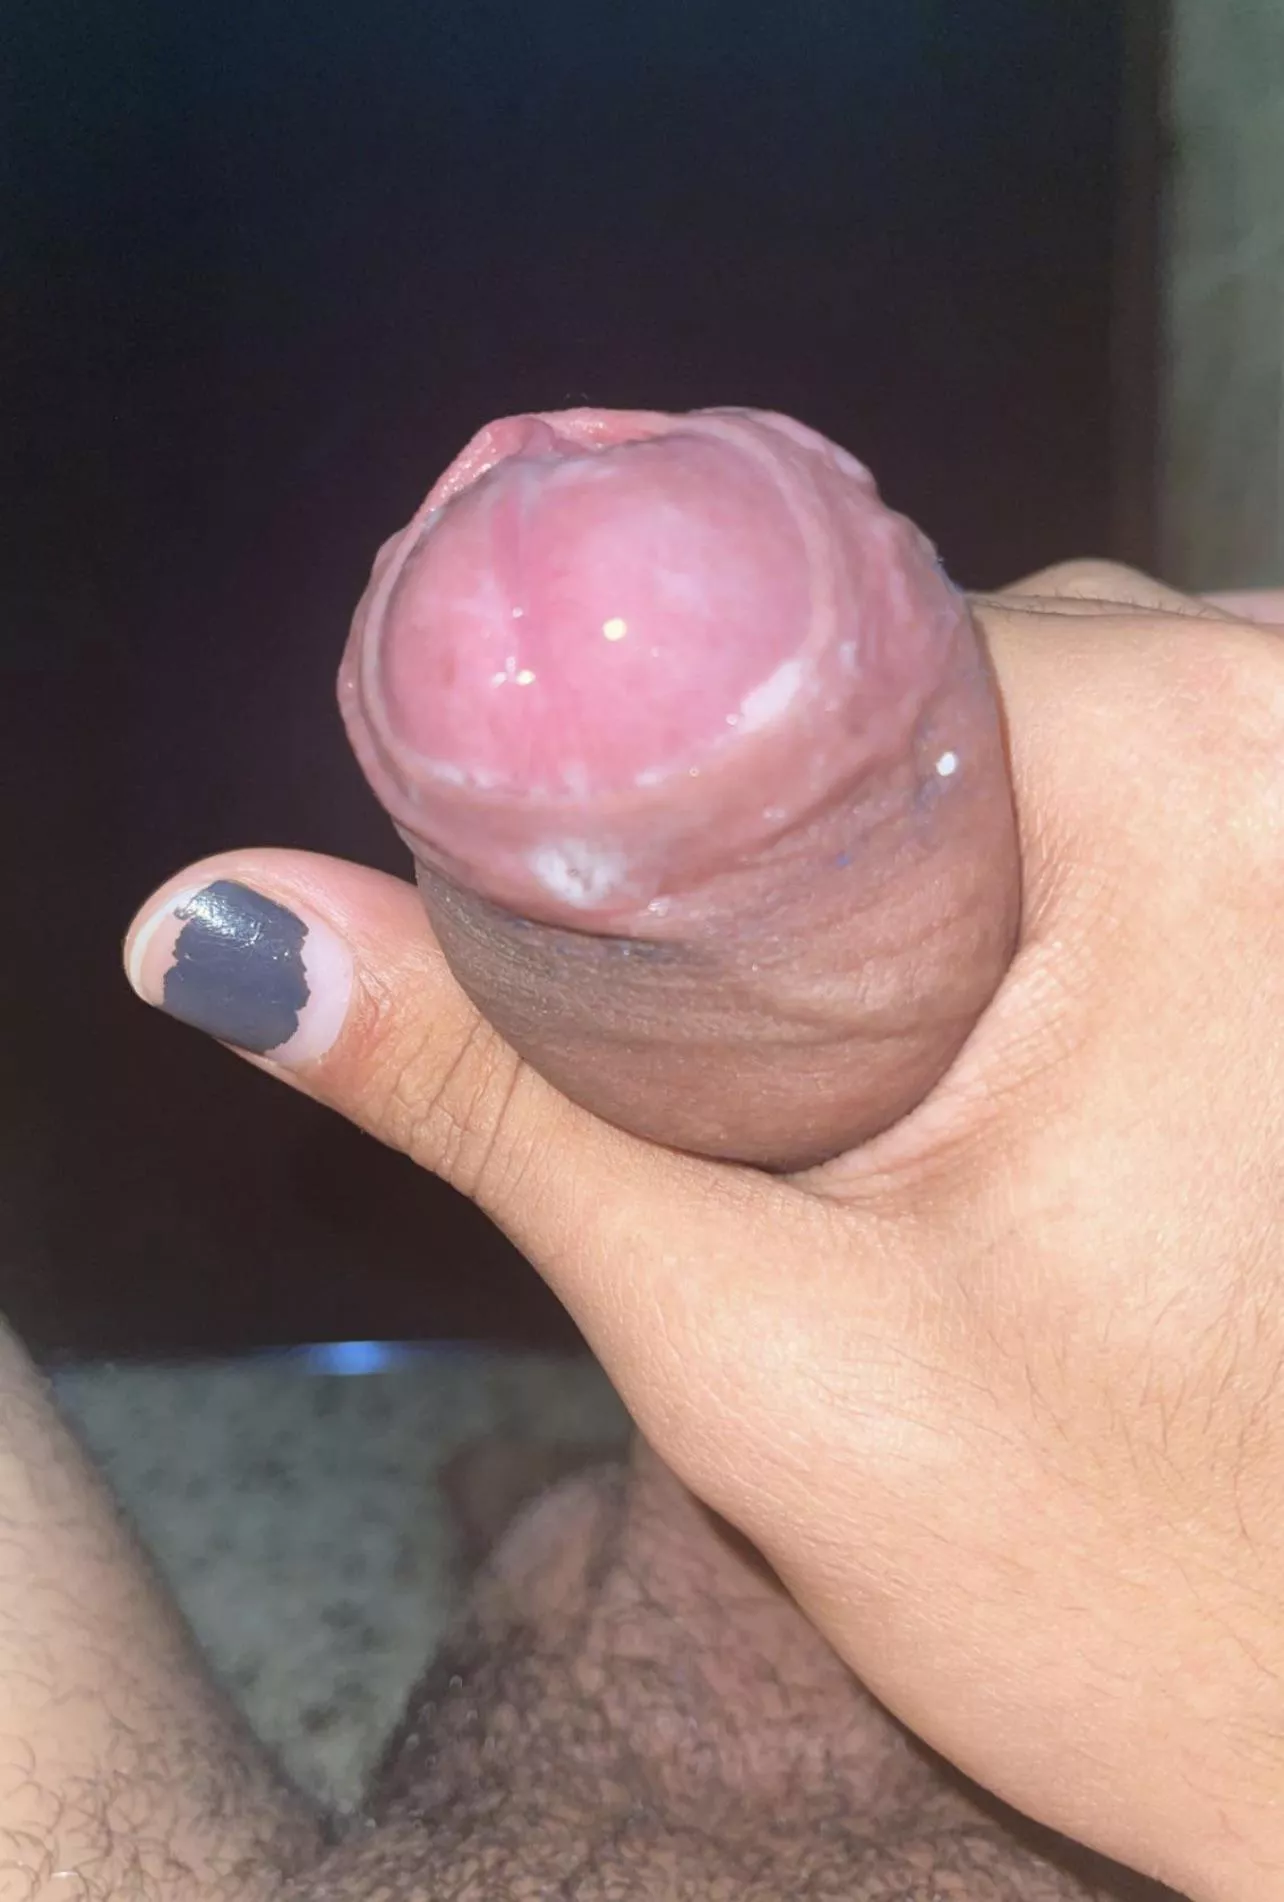 Big nude cock without face